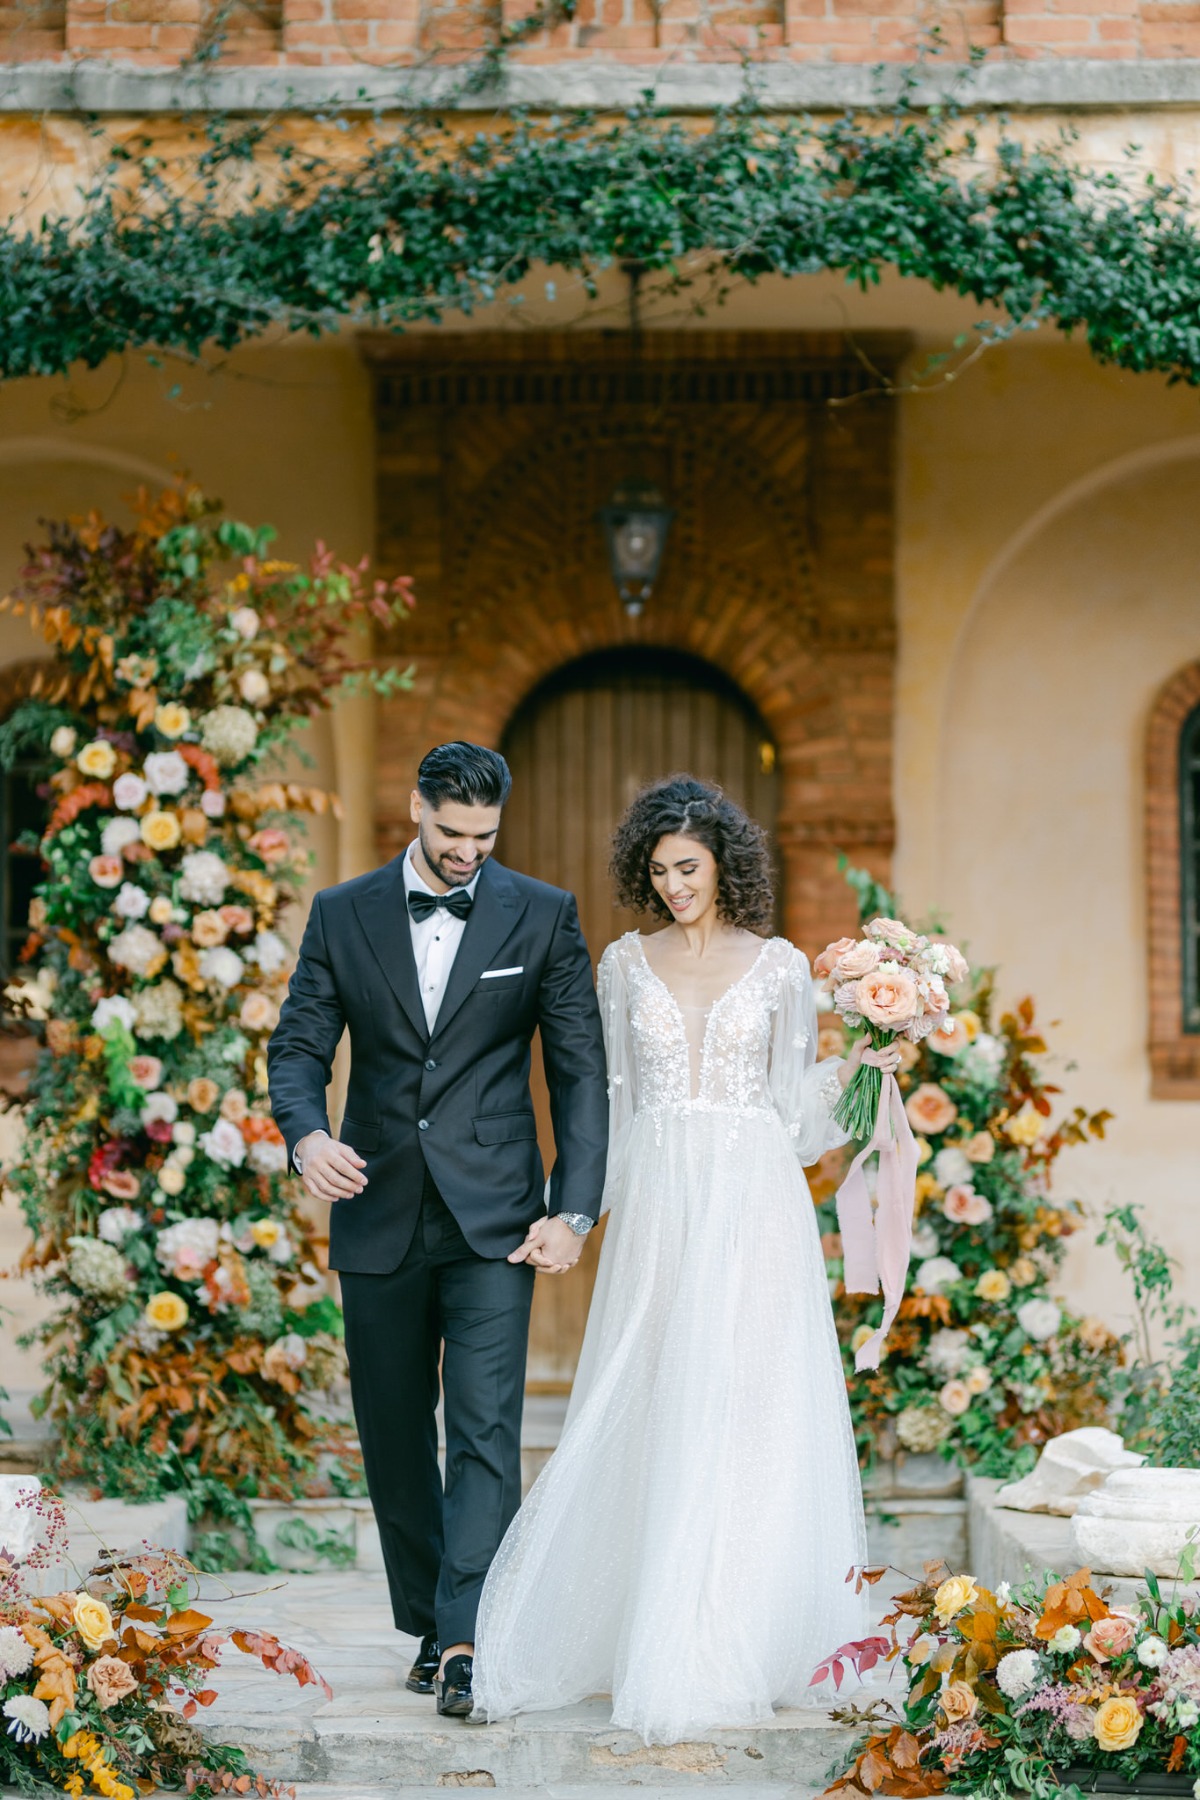 Dreamy newlyweds at autumn floral wedding in Greece